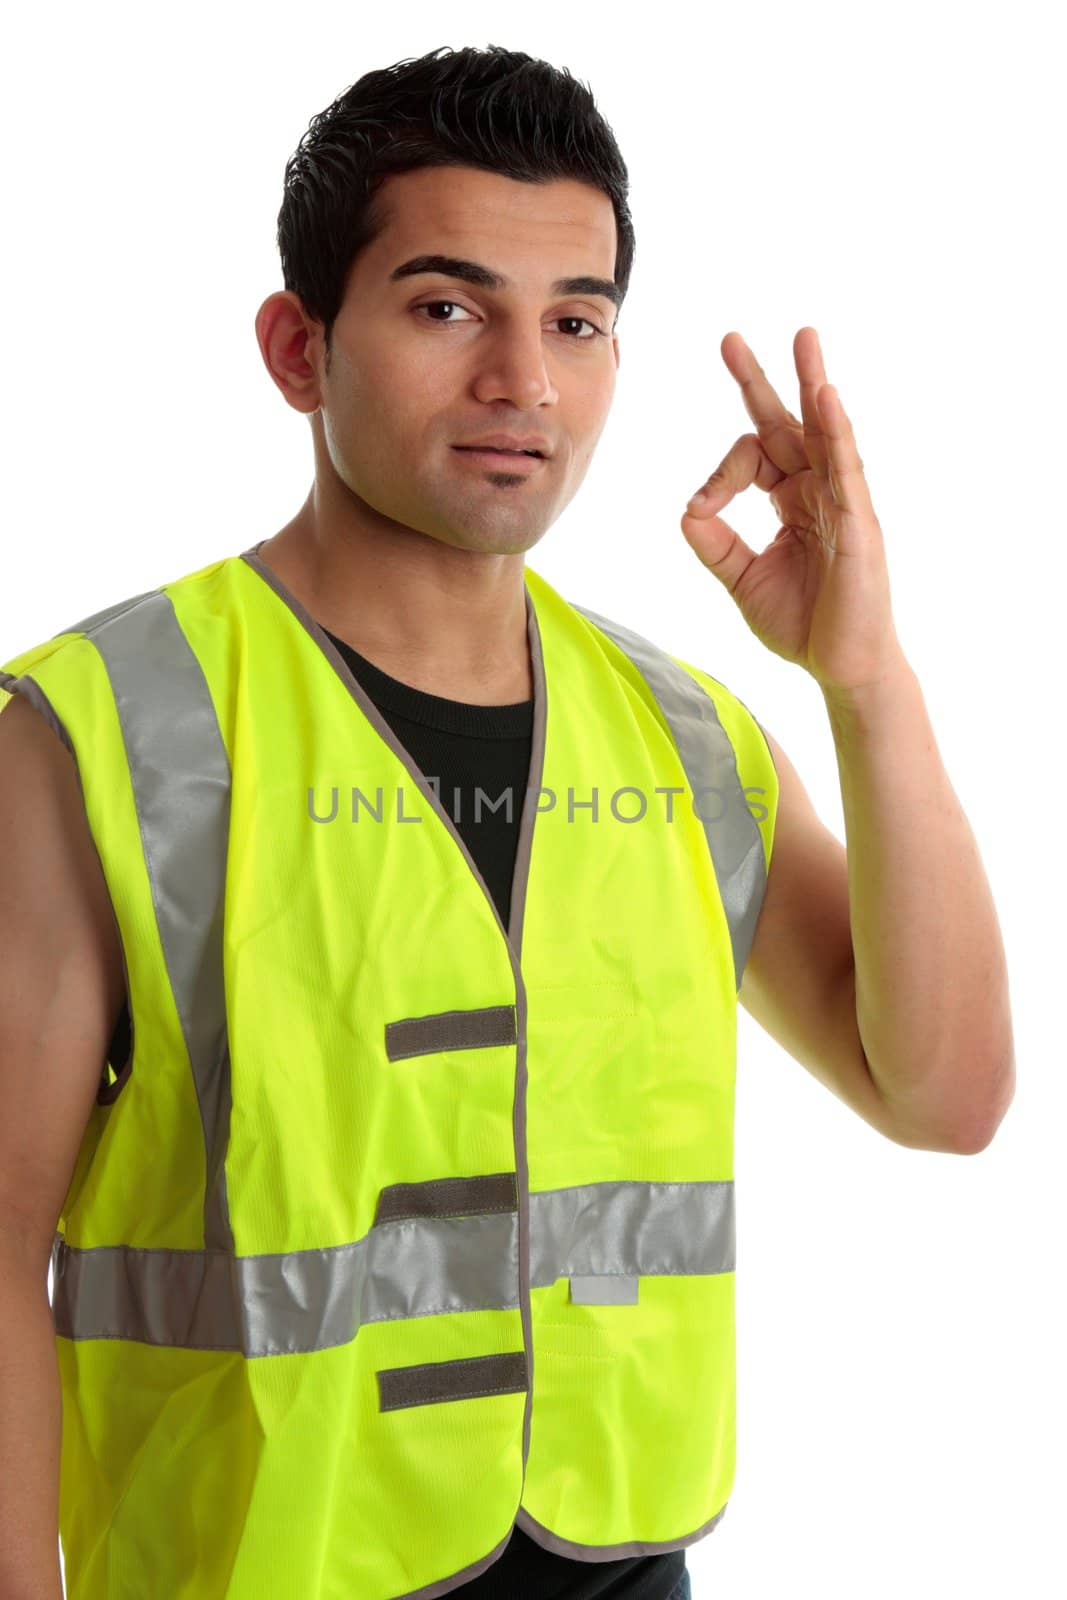 Ethnic mixed race, blue collar man such as a builder, tradesman, labourer, handyman gestures a positive a-ok approval hand sign gesture.  White background.